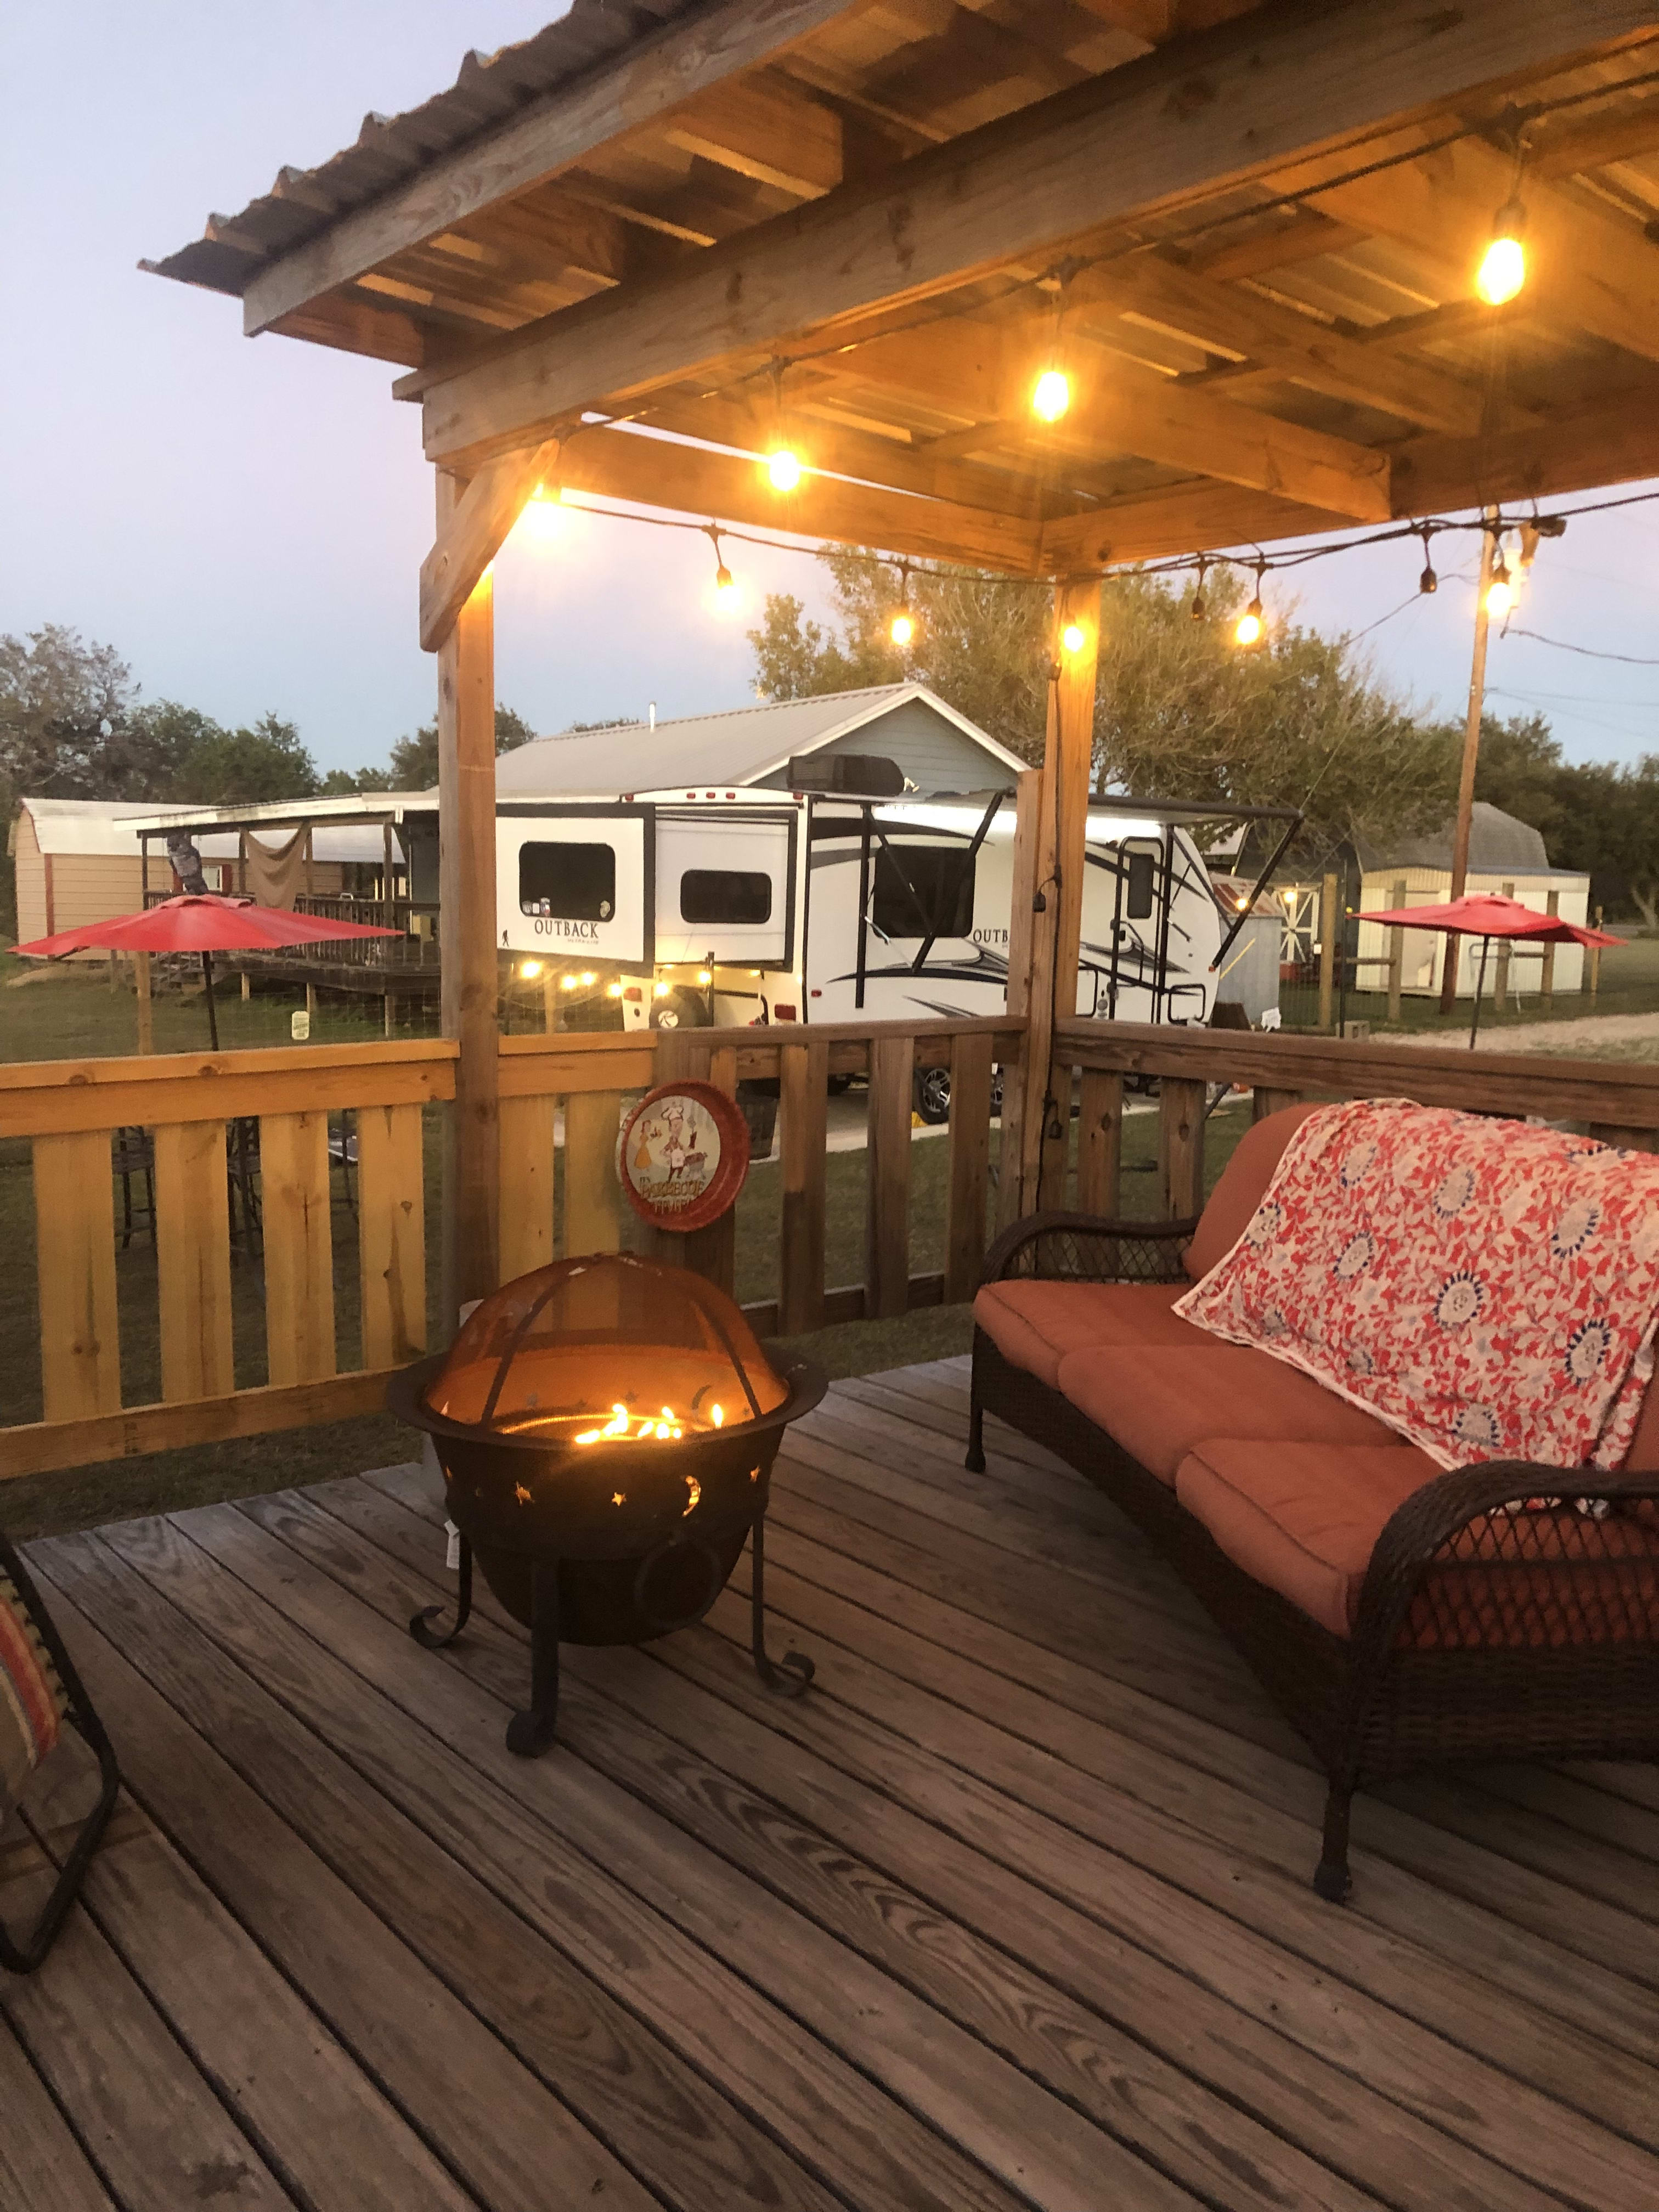 The Glamping Camper